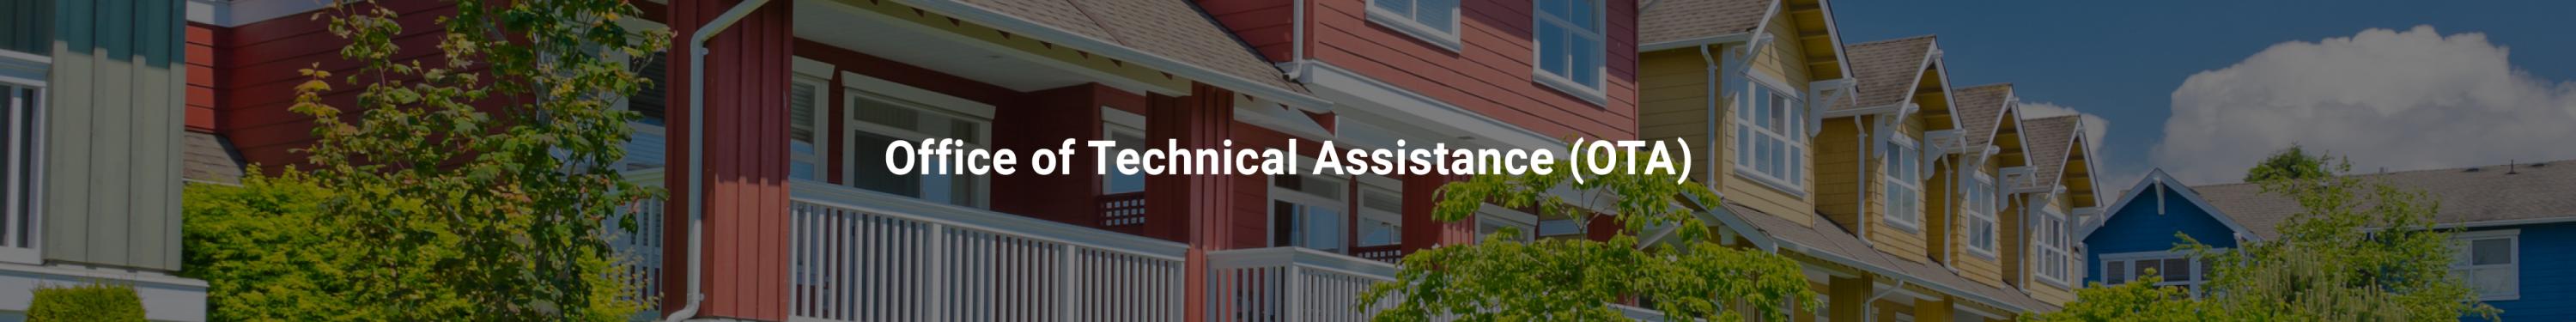 Office of Technical Assistance (OTA)